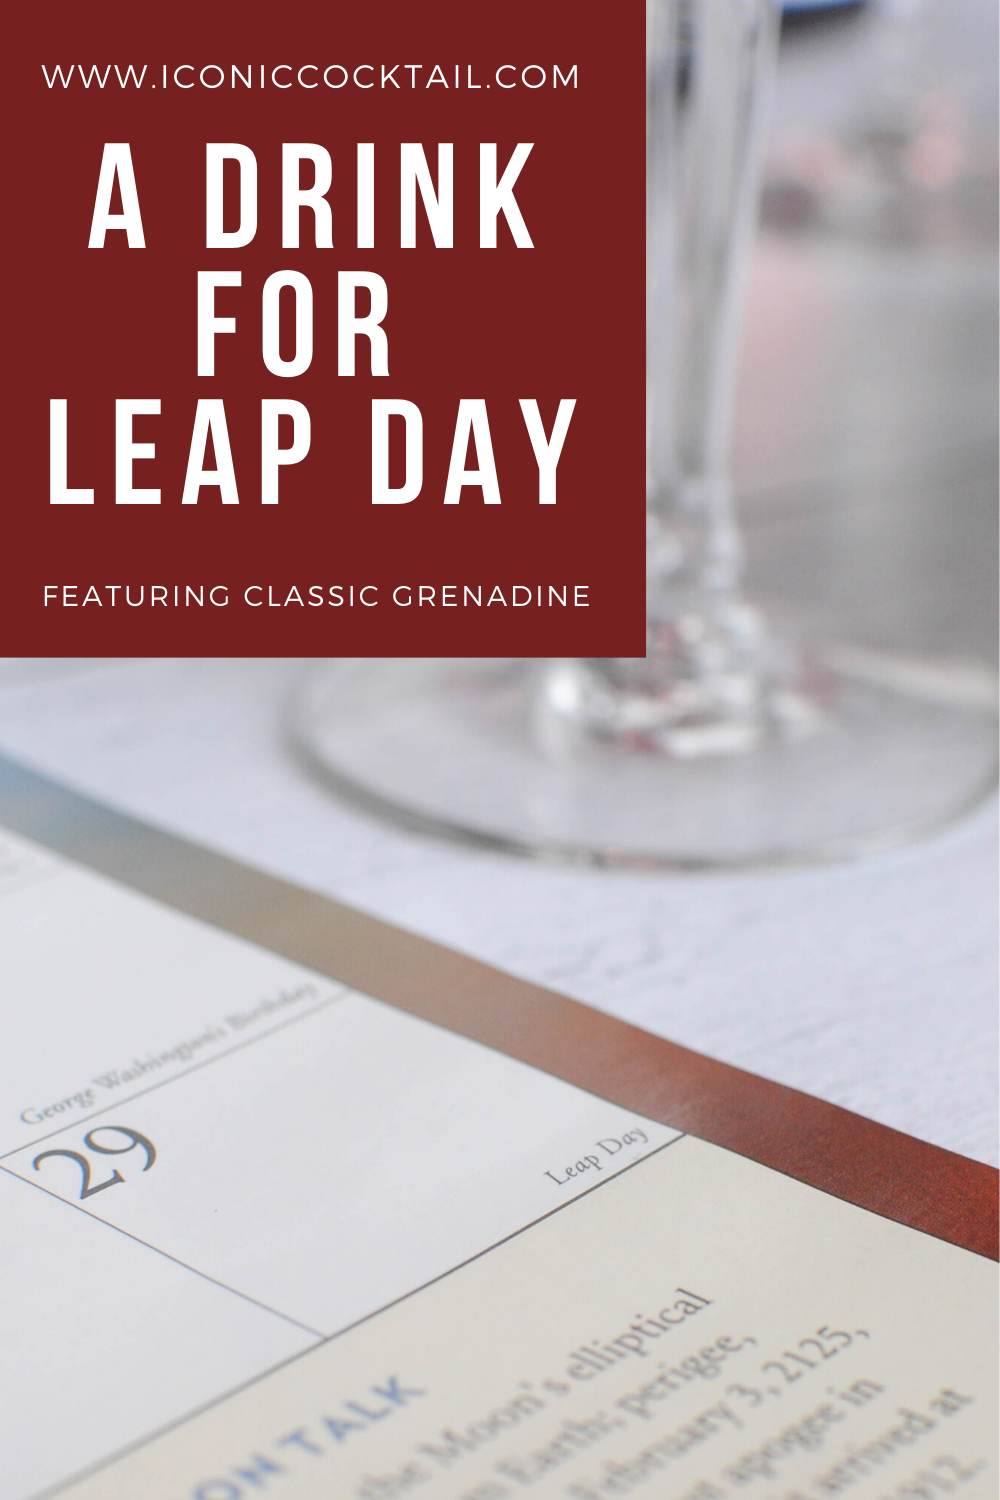 A Drink for Leap Day